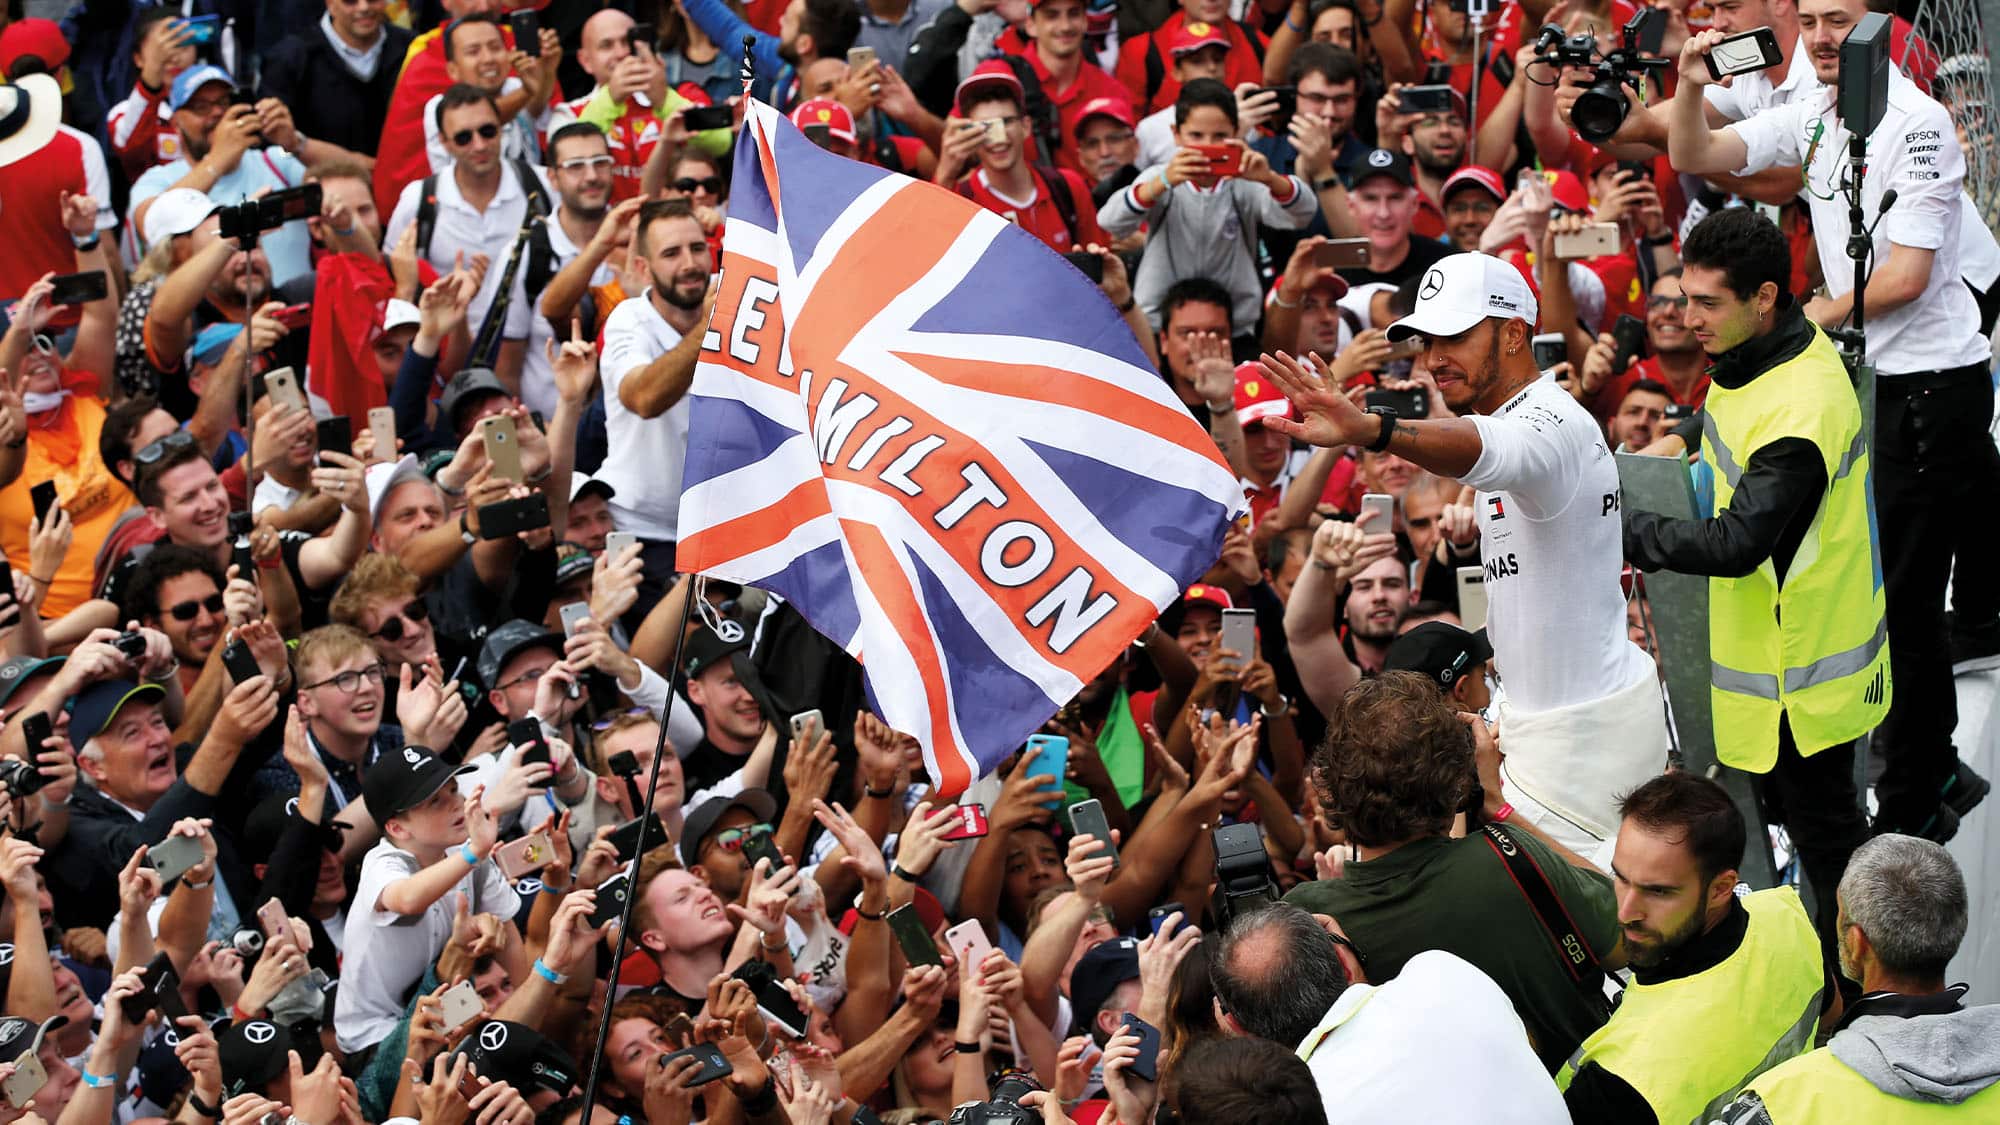 Lewis Hamilton celebrates with fans after winning the 2018 Italian Grand Prix